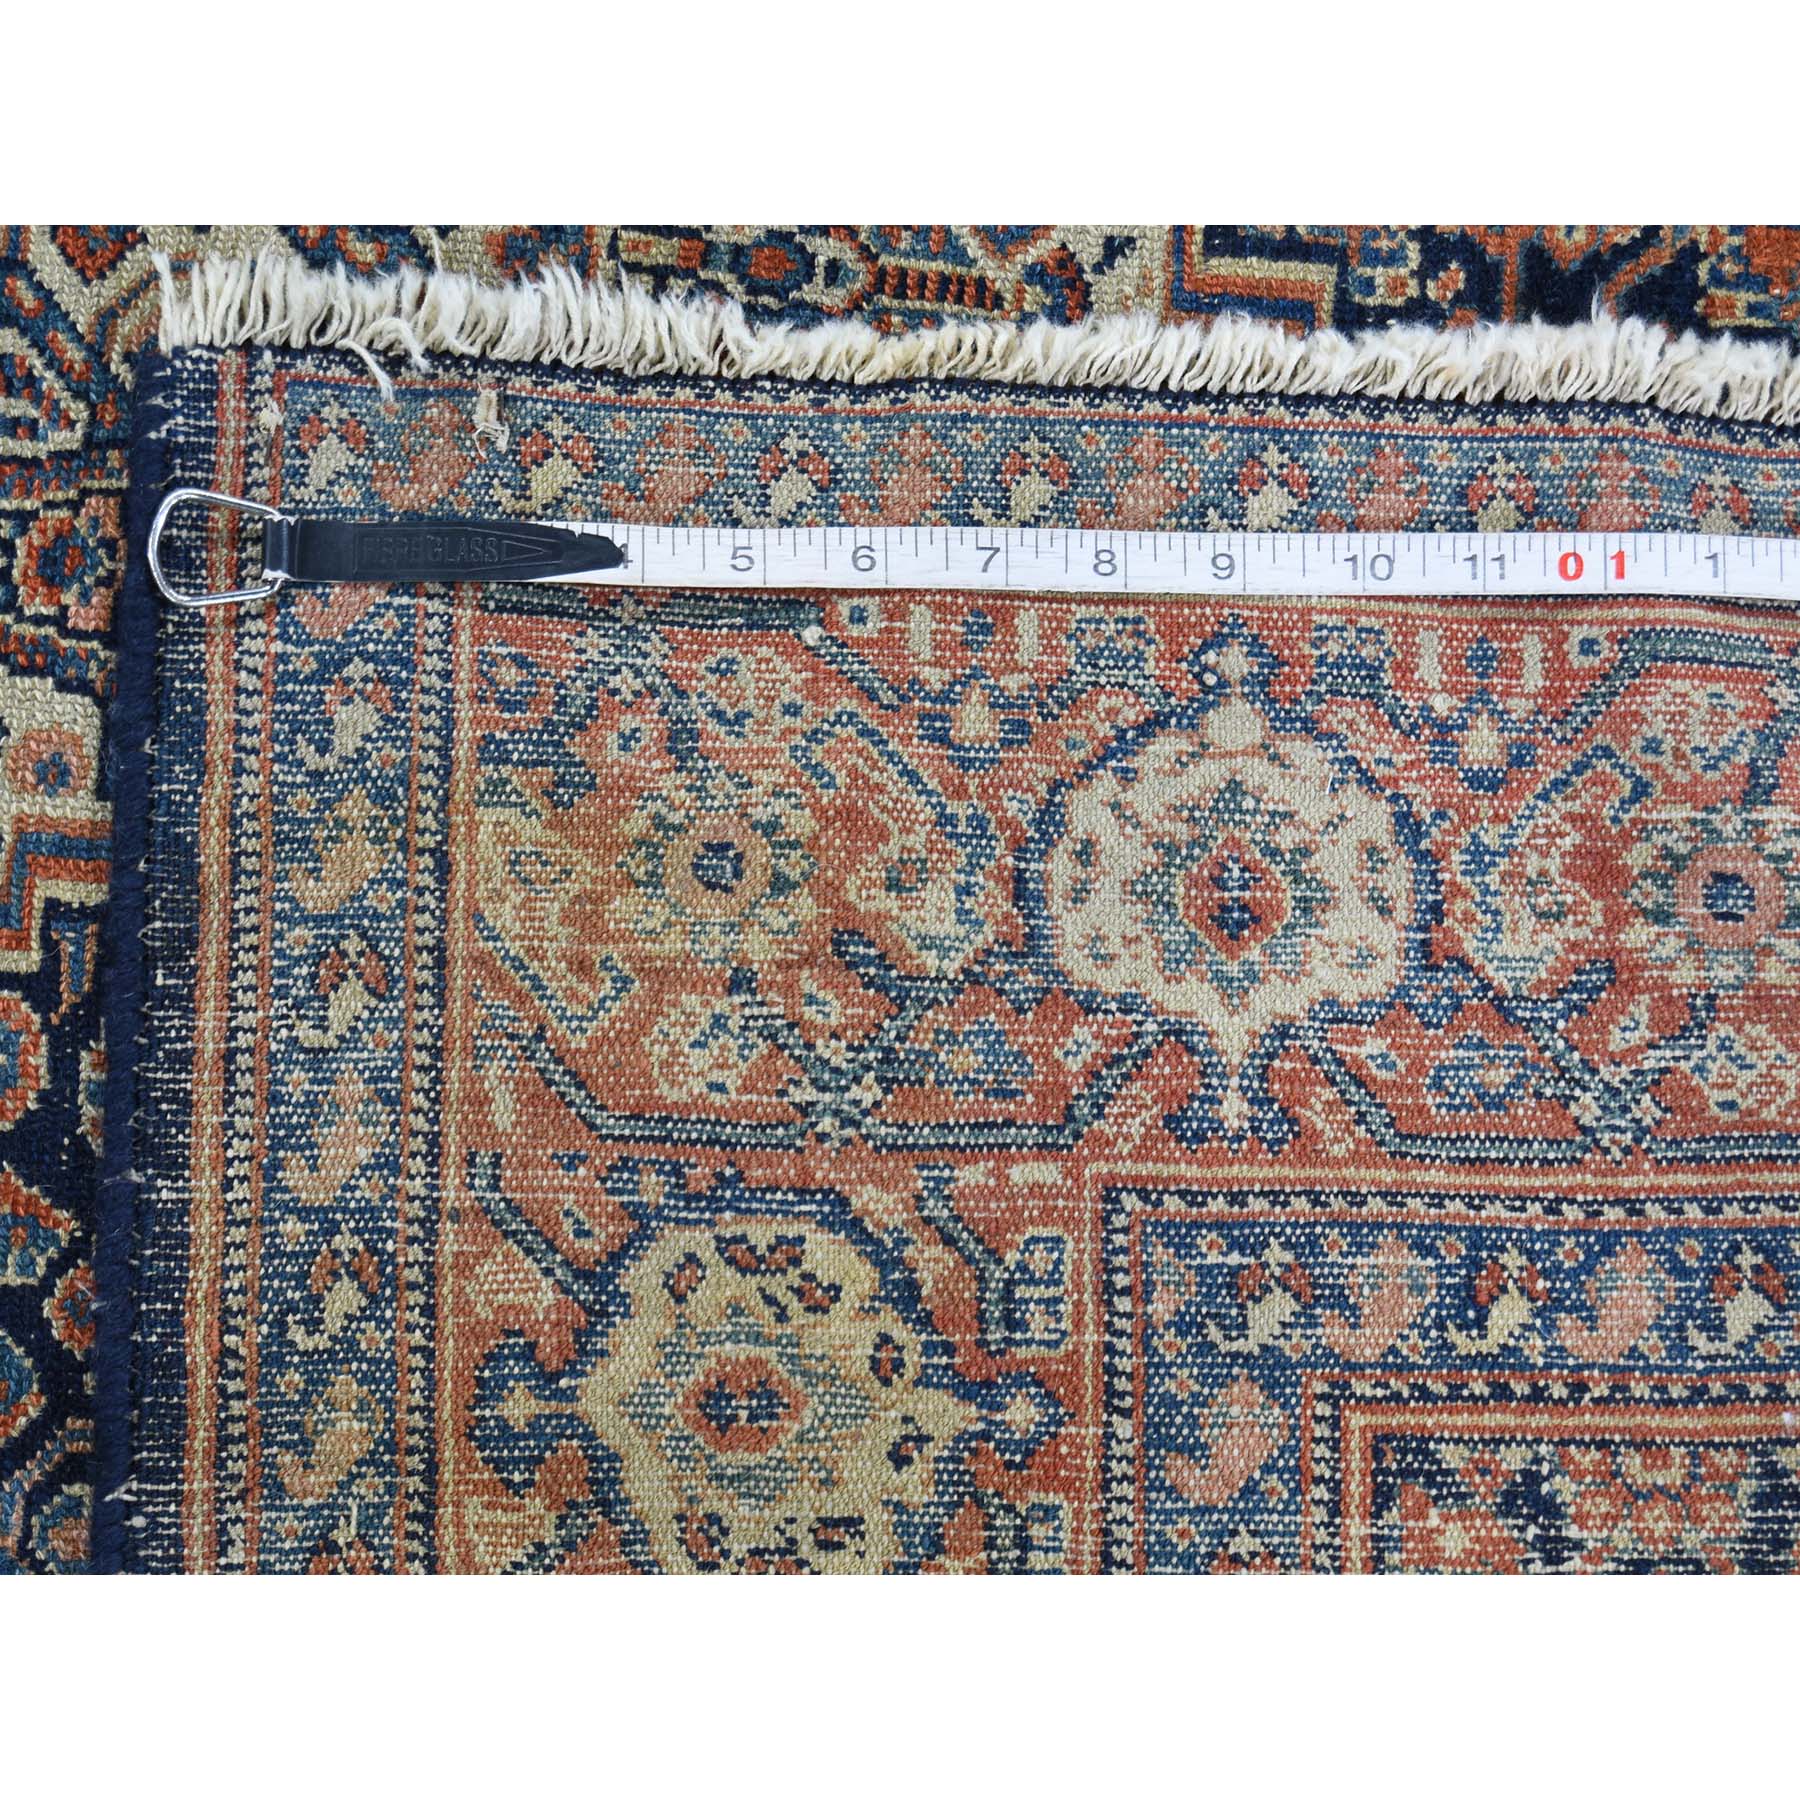 4'4"x6'6" Antique Persian Senneh Exc Cond Pure Wool Hand Woven Oriental Rug 